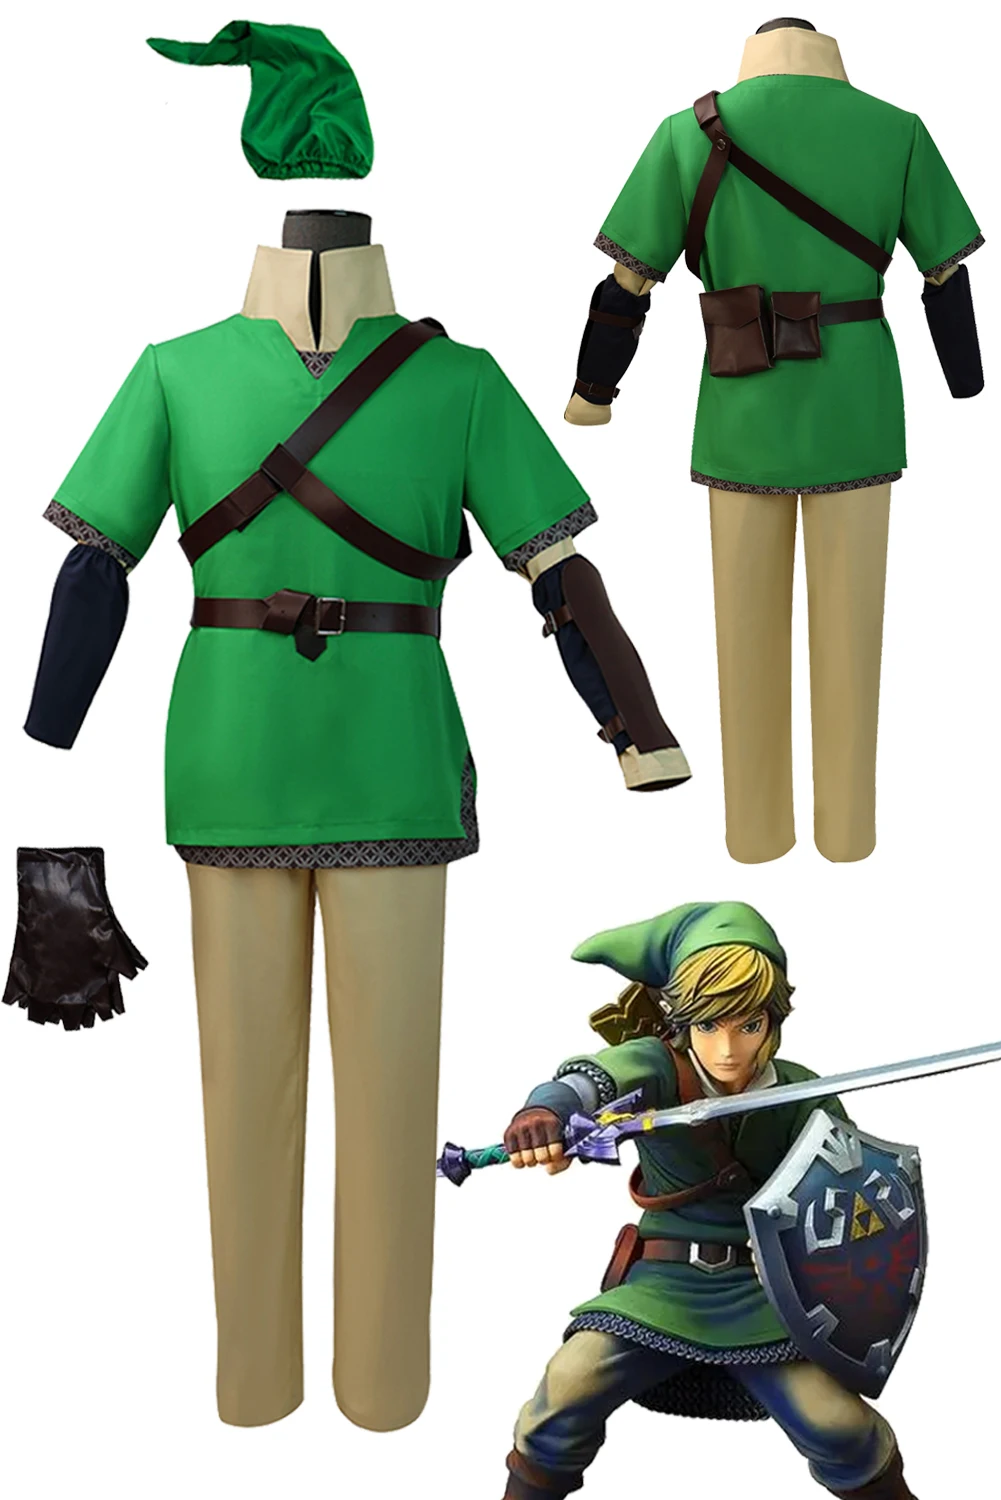 

Link Cosplay Men Costume Anime Game Zelda Skyward Sword Roleplay Fantasia Halloween Carnival Party Clothes For Adult Disguise